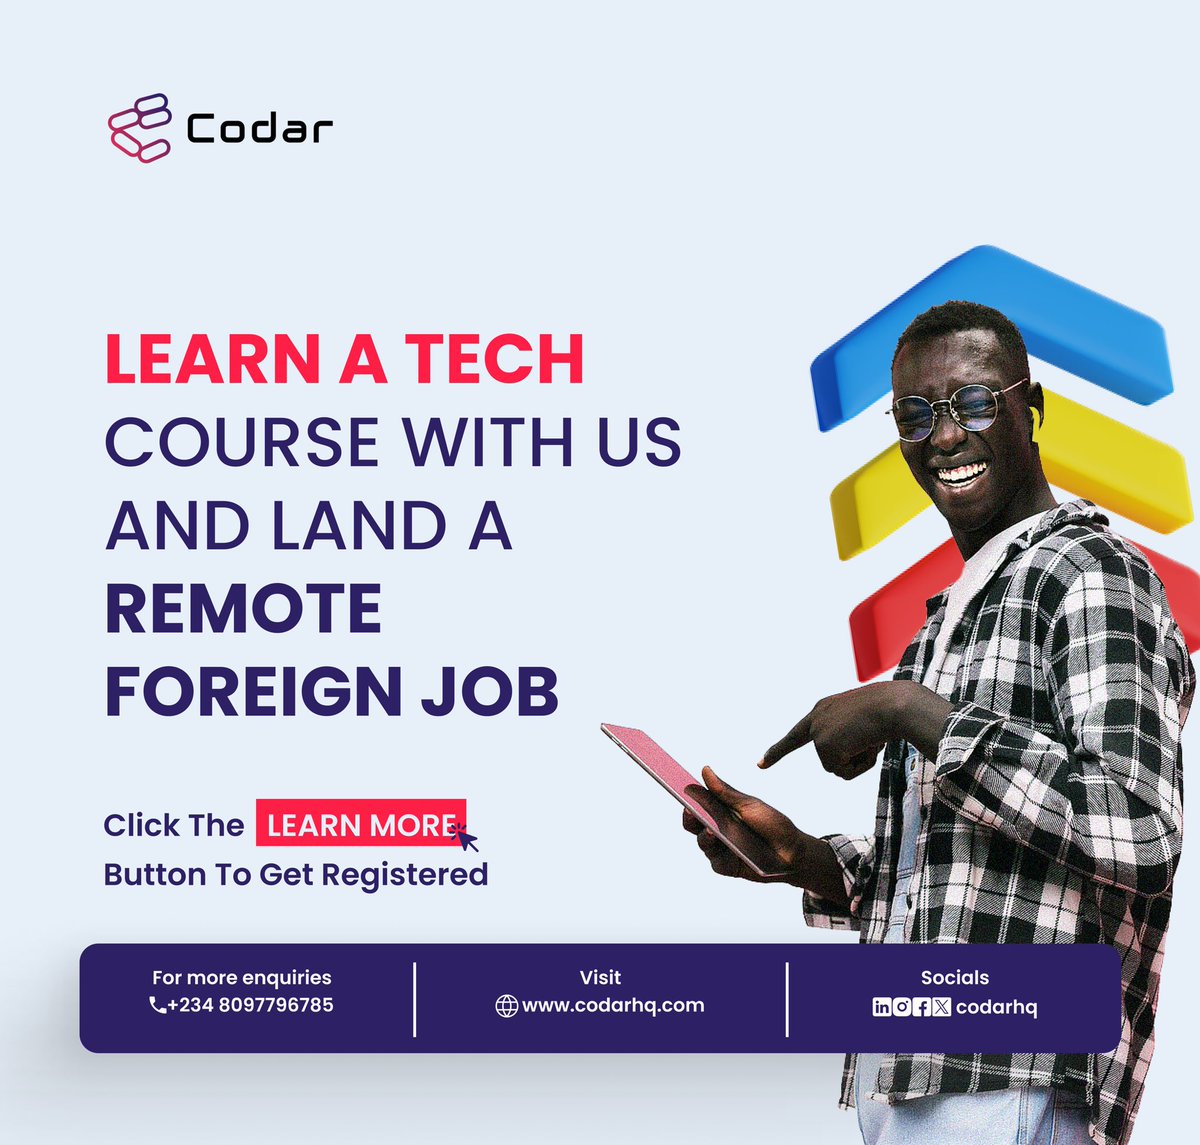 Looking to switch your Career to Tech?  or Looking to Land a Remote job that earns in Dollars? 

Get connected to High paying Jobs Globally by sending us a DM to get started right now